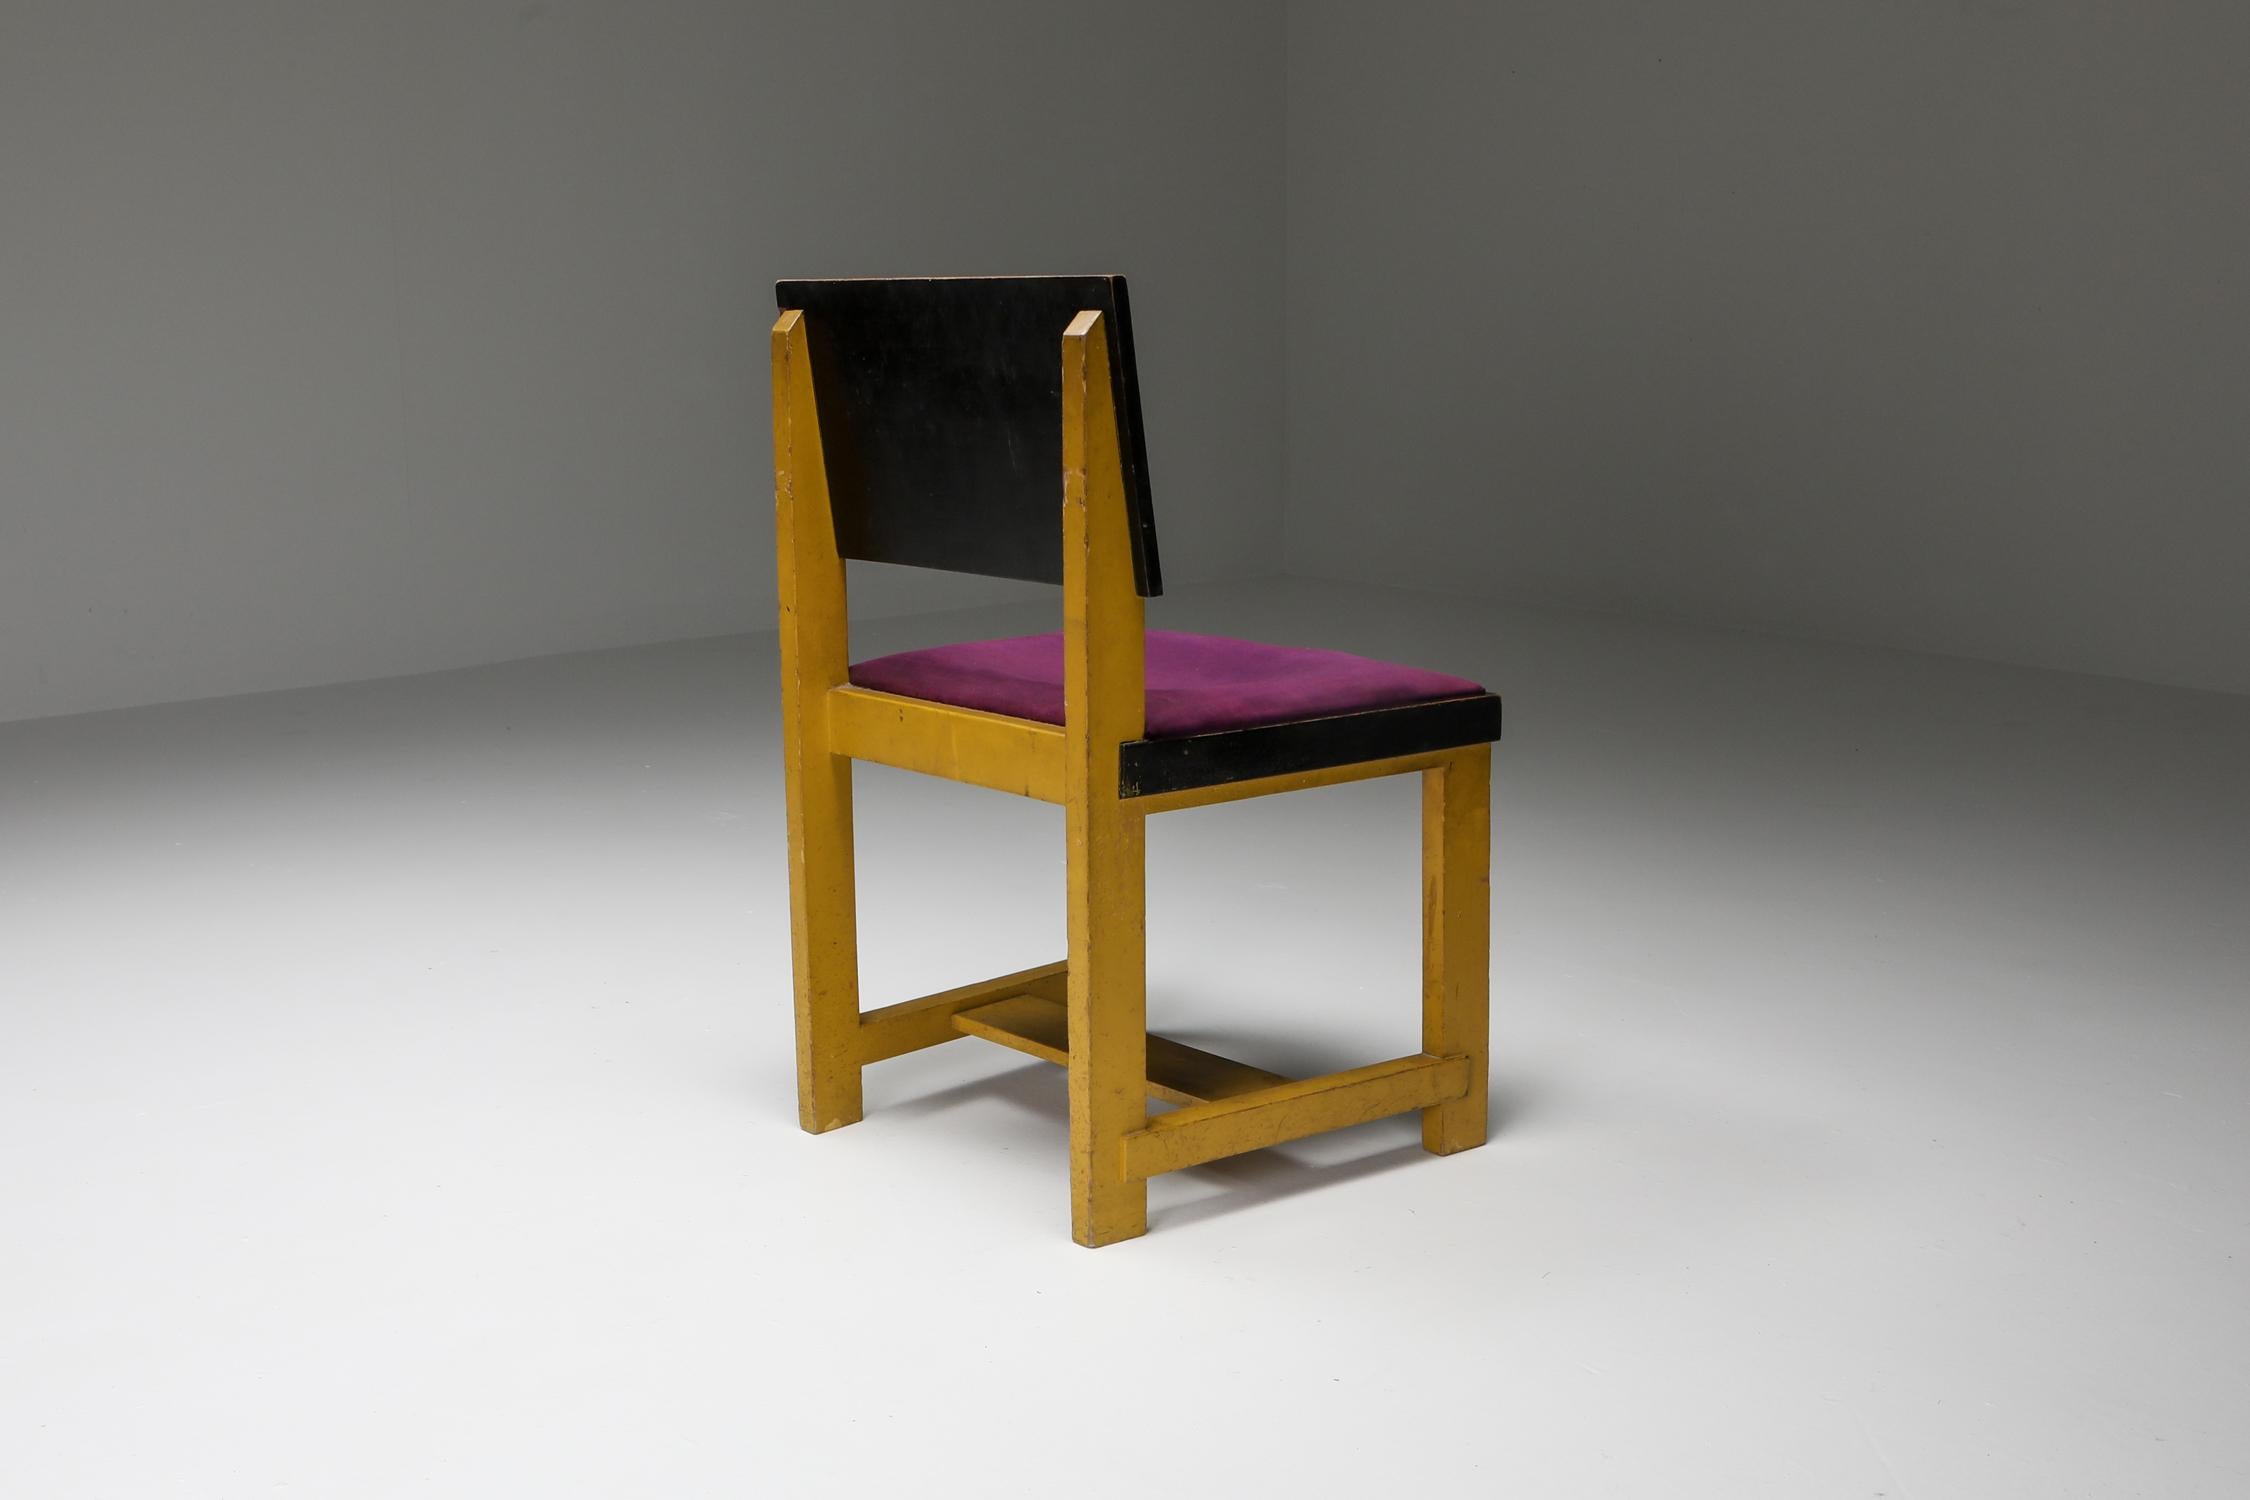 Yellow and black modernist chair, Hendrik Wouda, H. Pander & Zonen, Netherlands, 1924

Painted pine

Part of the Exhibition 